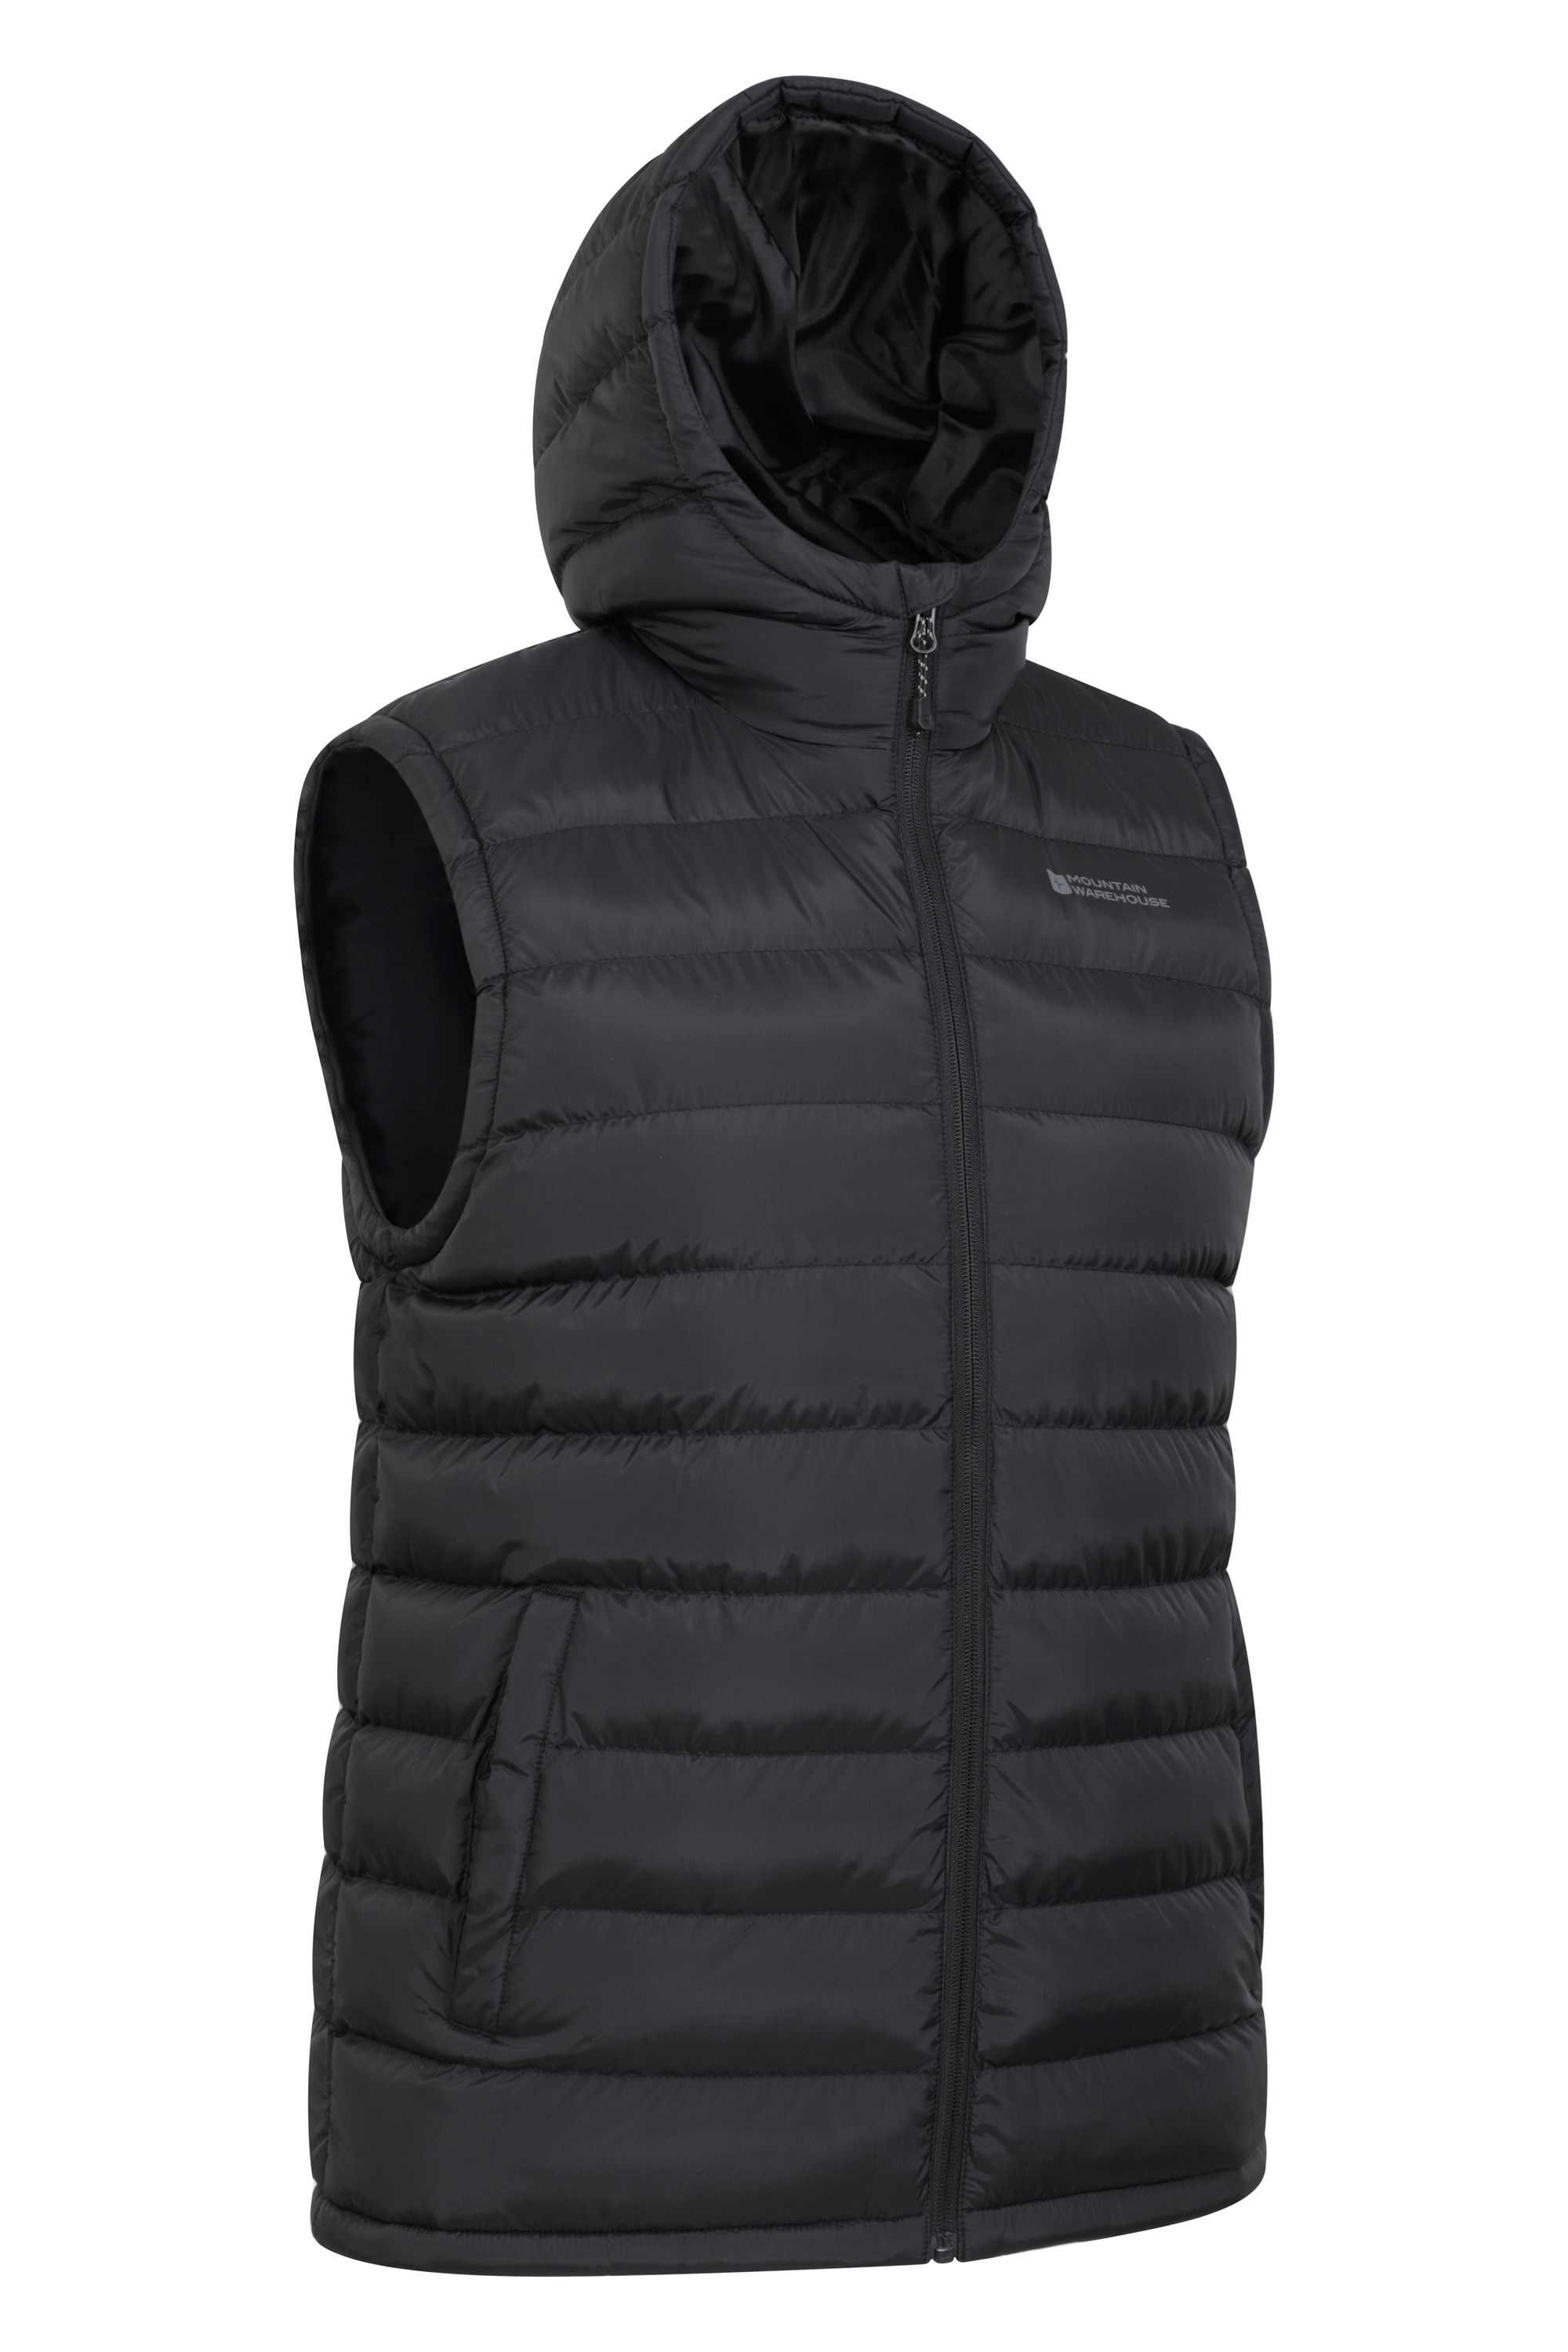 Mountain Warehouse Seasons Mens Hooded Insulated Vest - Black | Size S